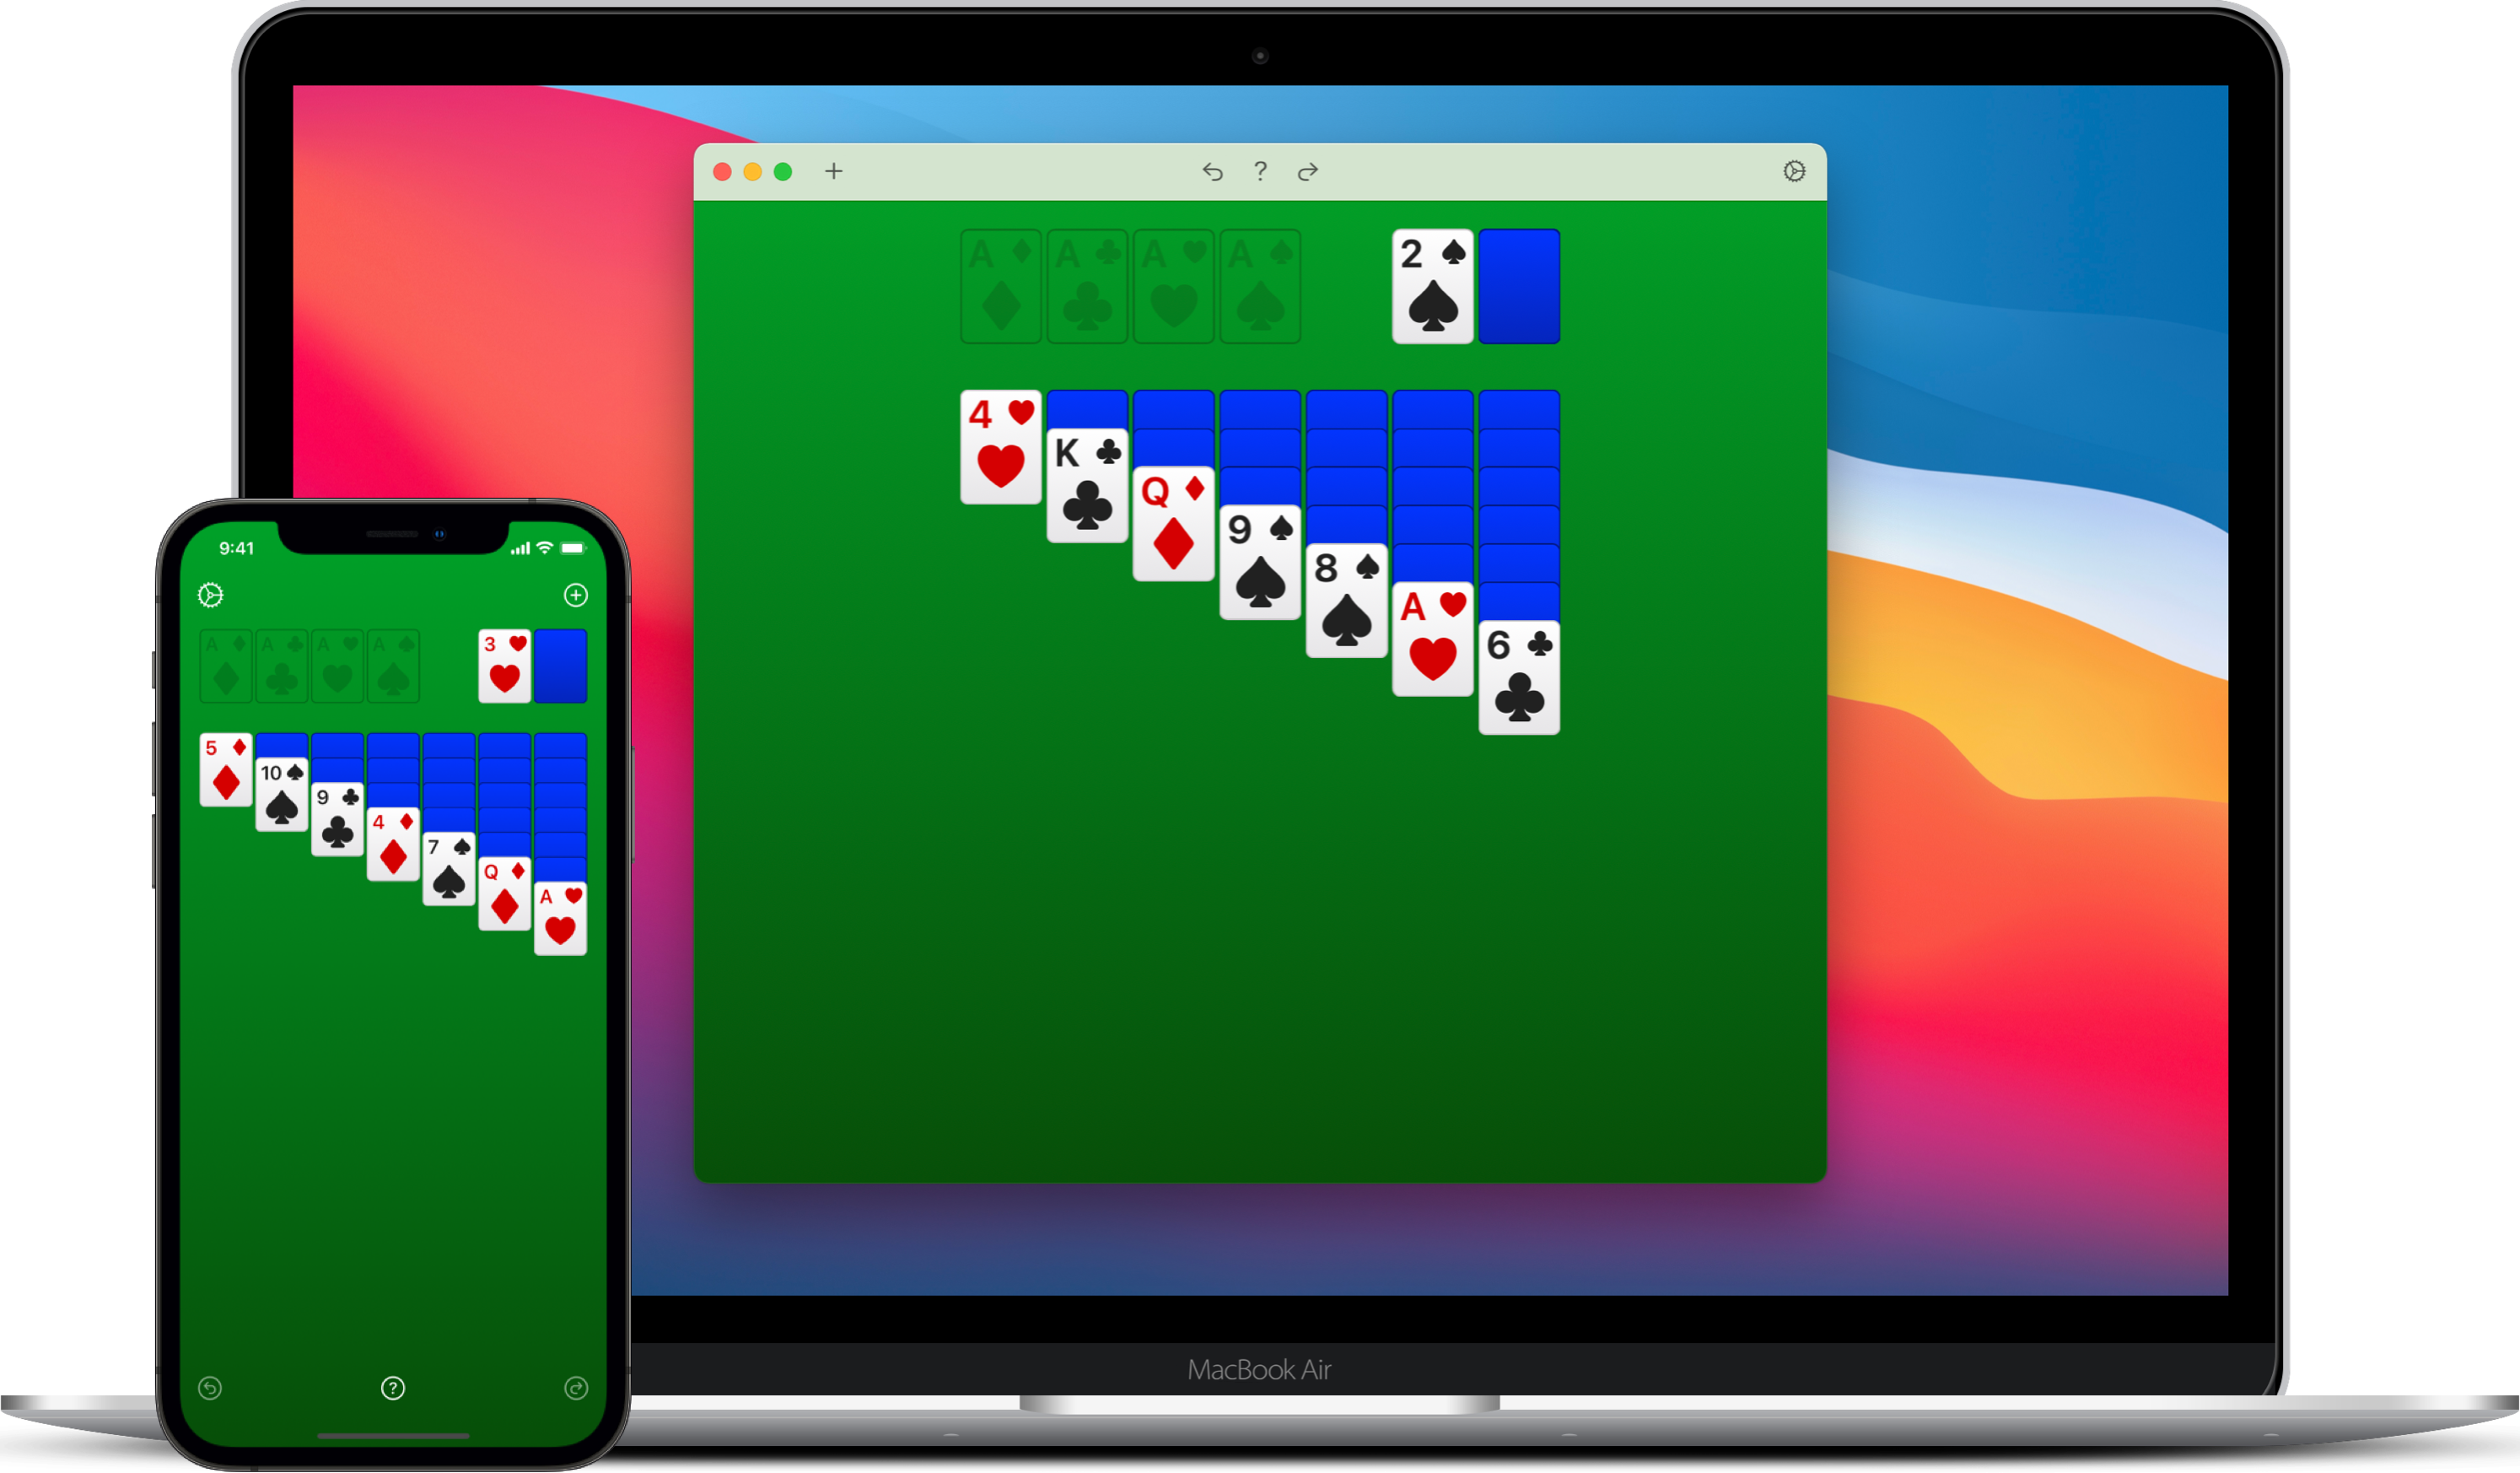 Solitaire open on iPhone and Macbook